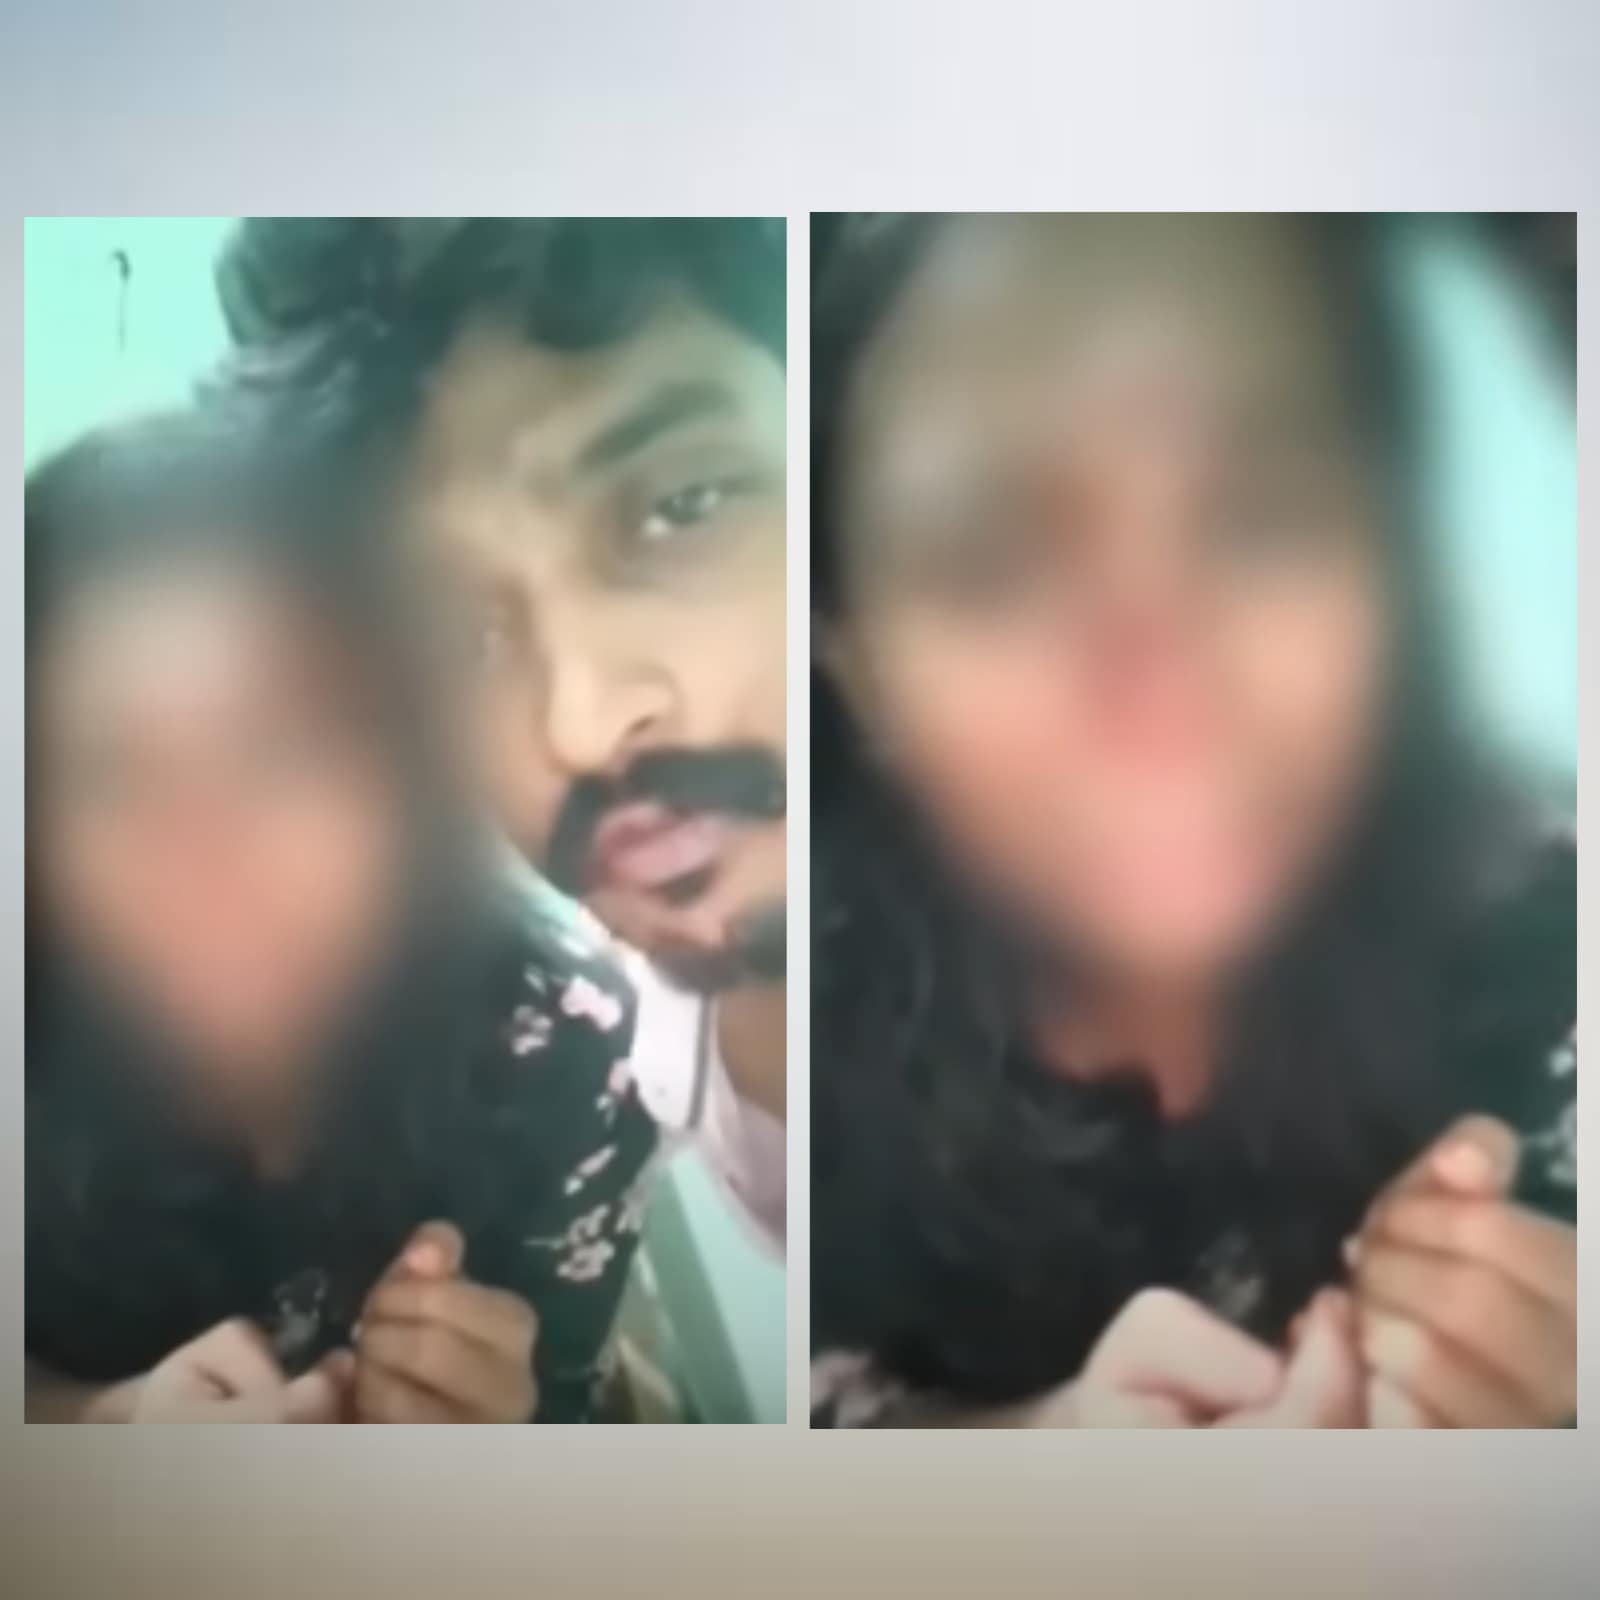 Kerala Man Thrashes Wife, Films Assault, Shares Video With Friends picture